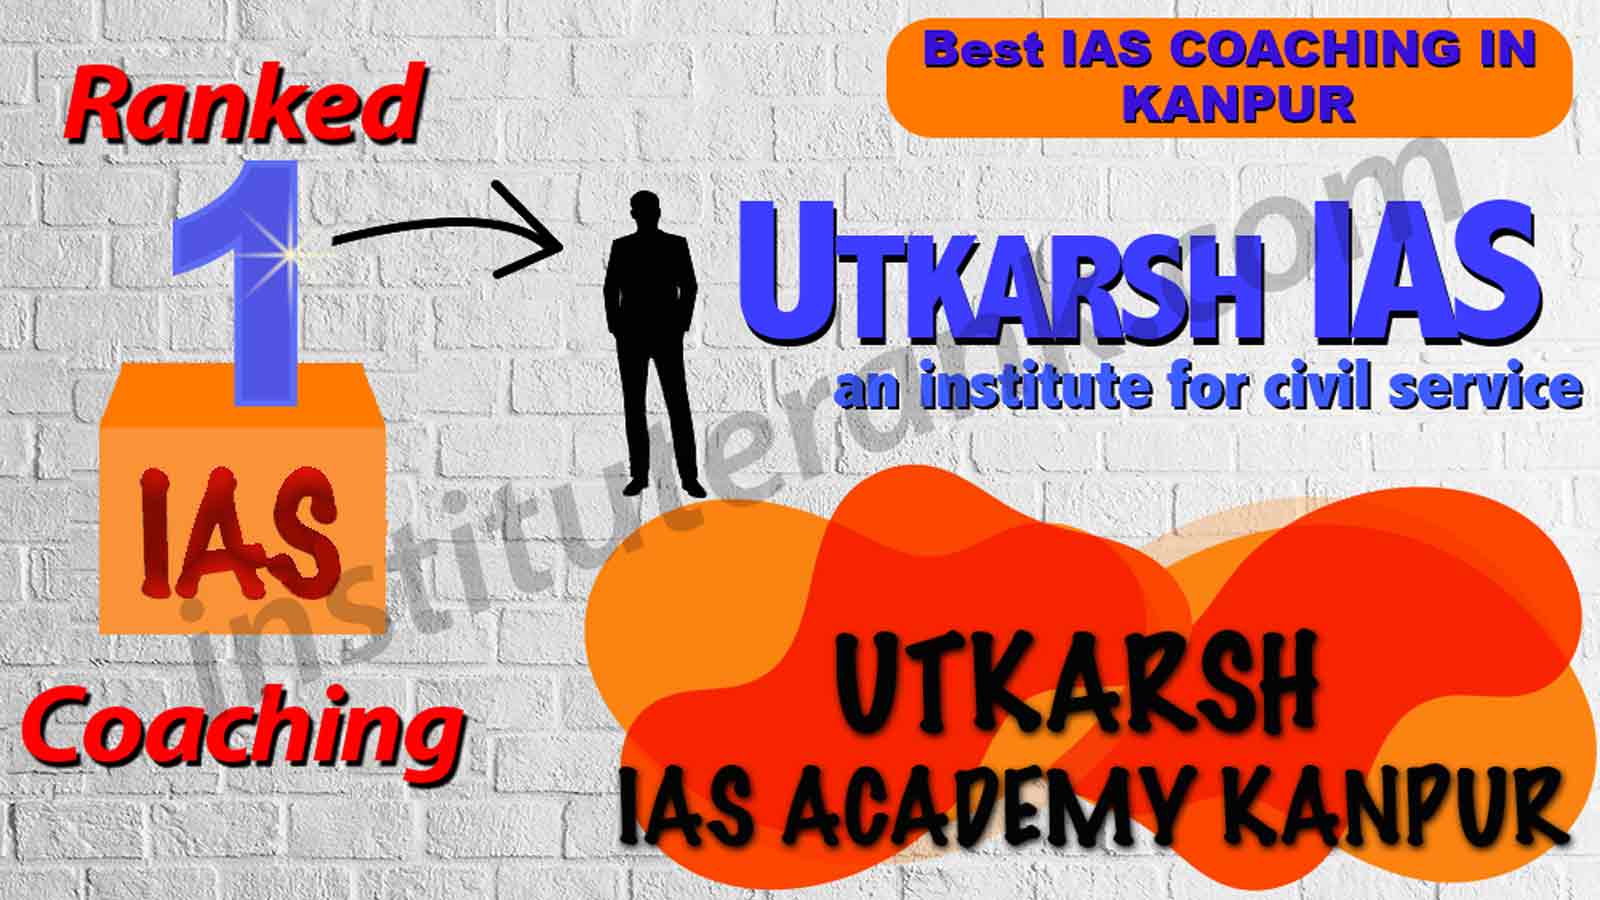 Best IAS Coaching in Kanpur